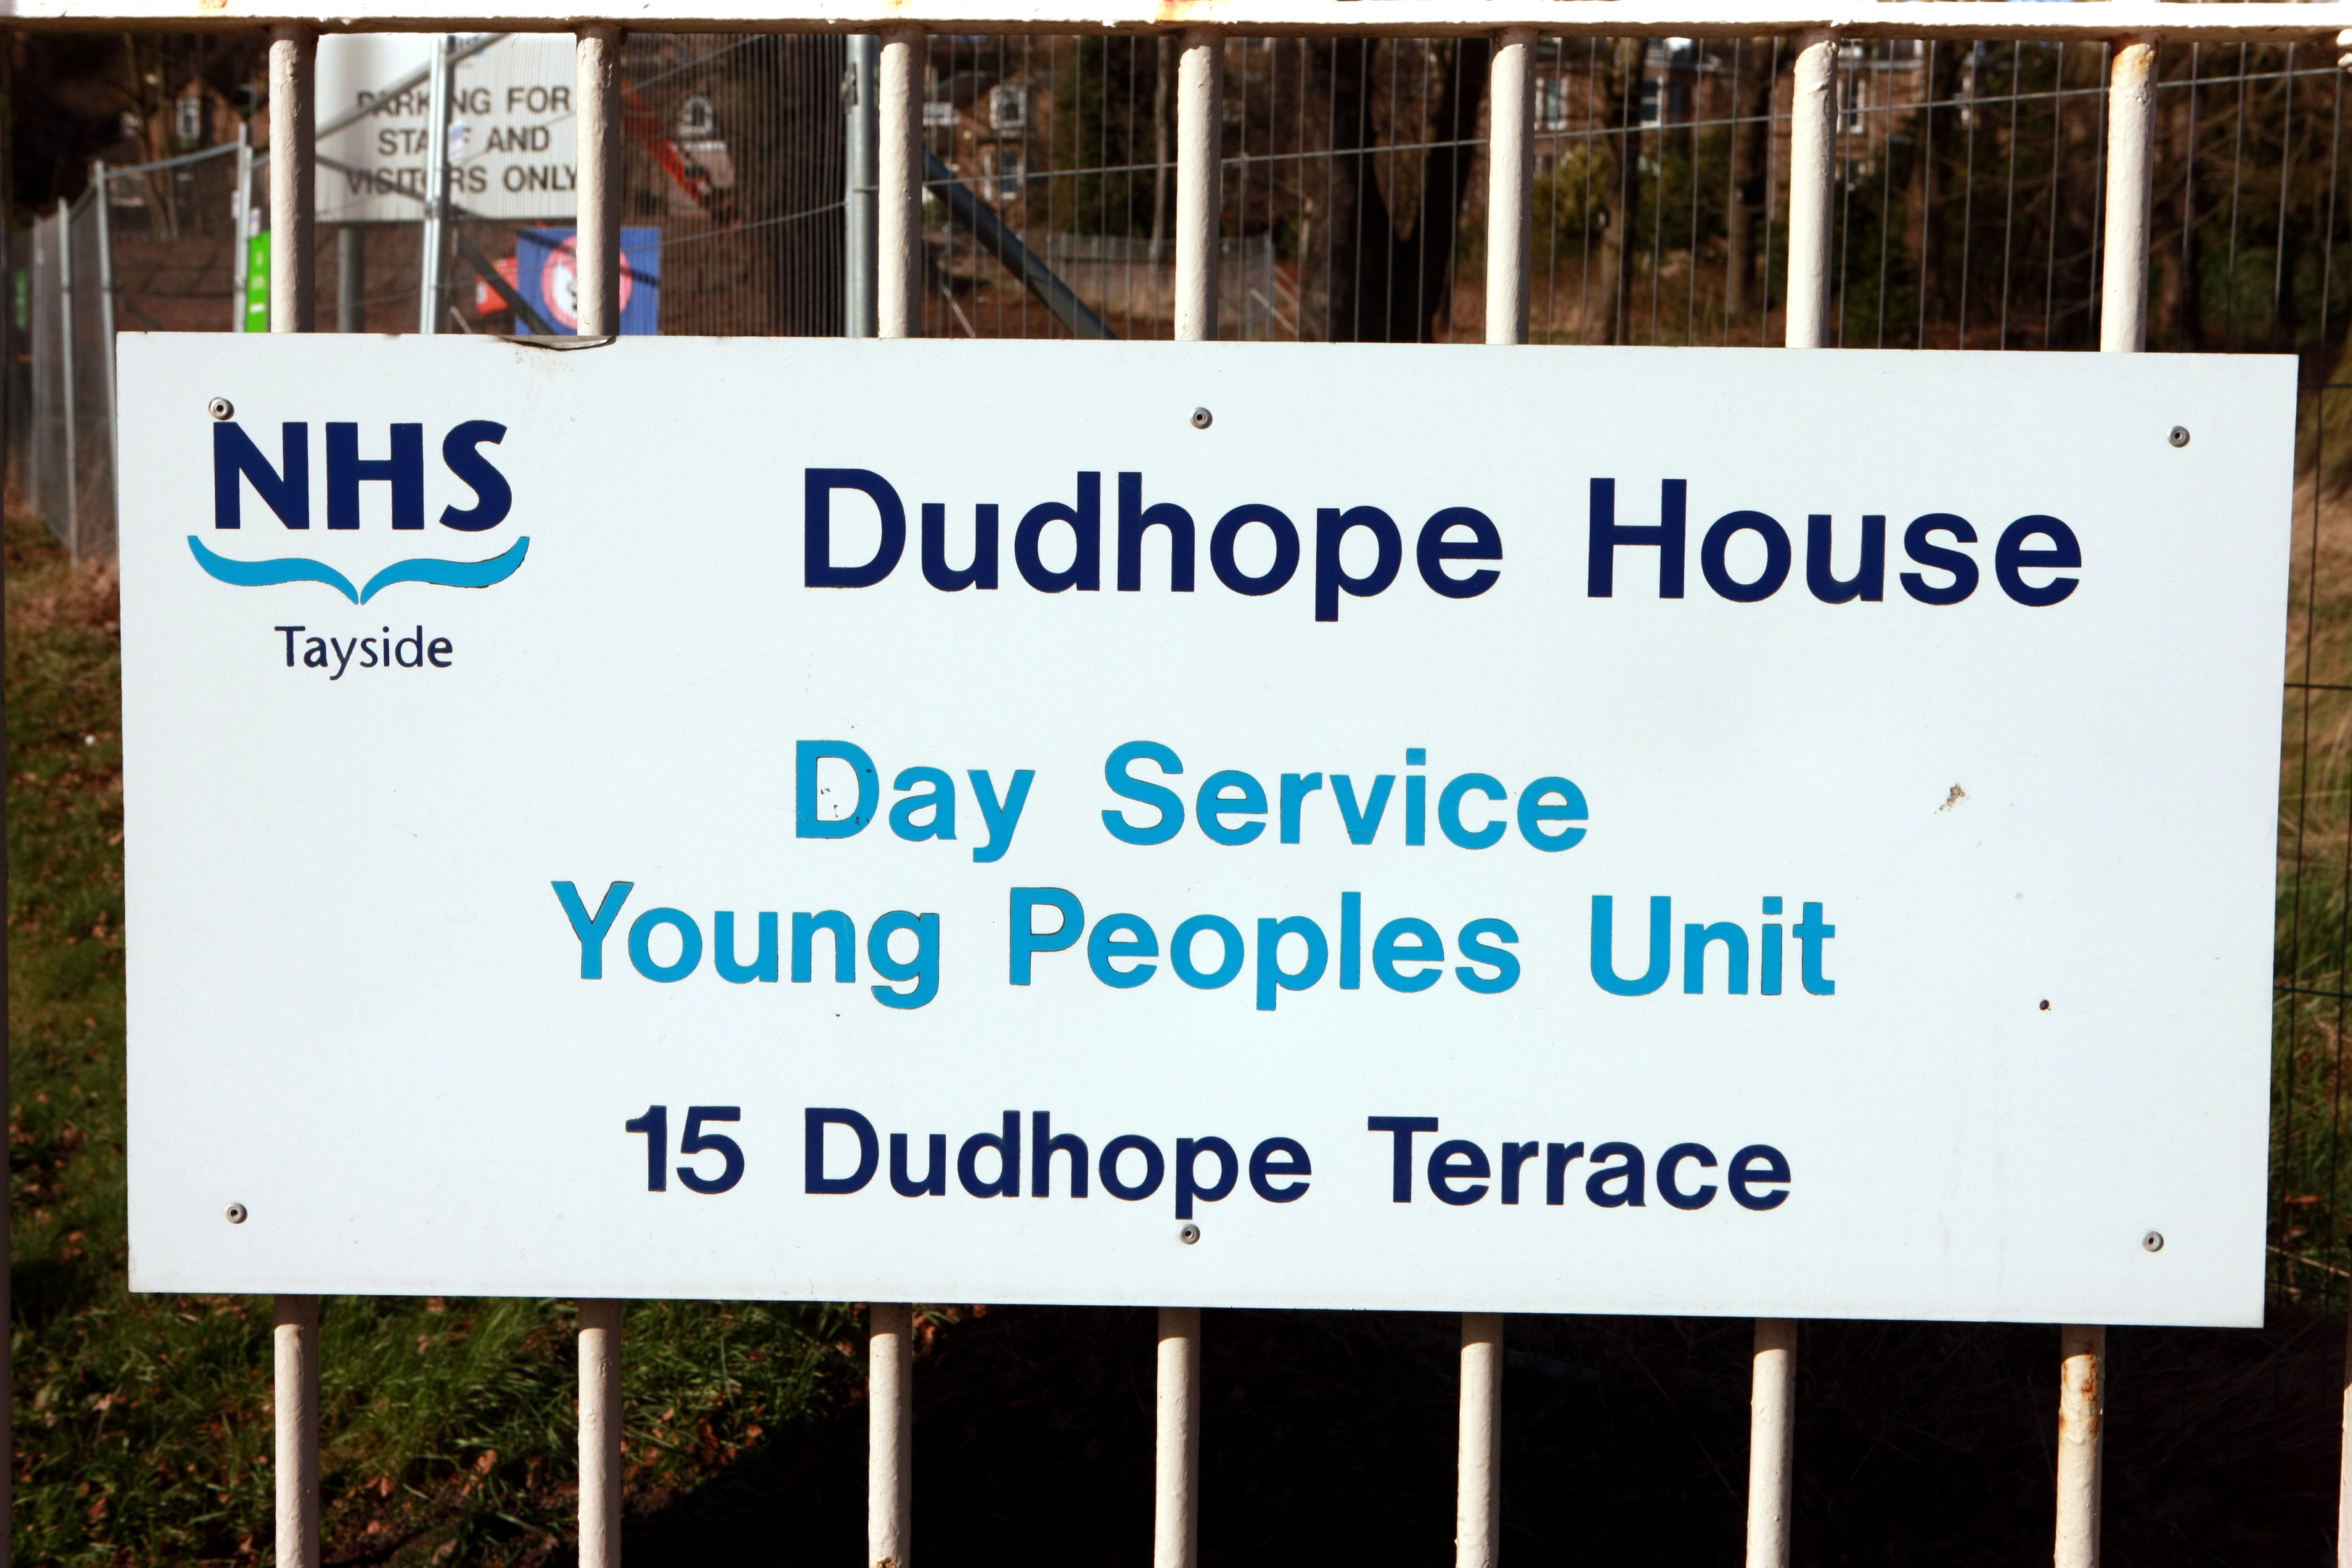 There are concerns about the low number of specialists at Dudhope House.